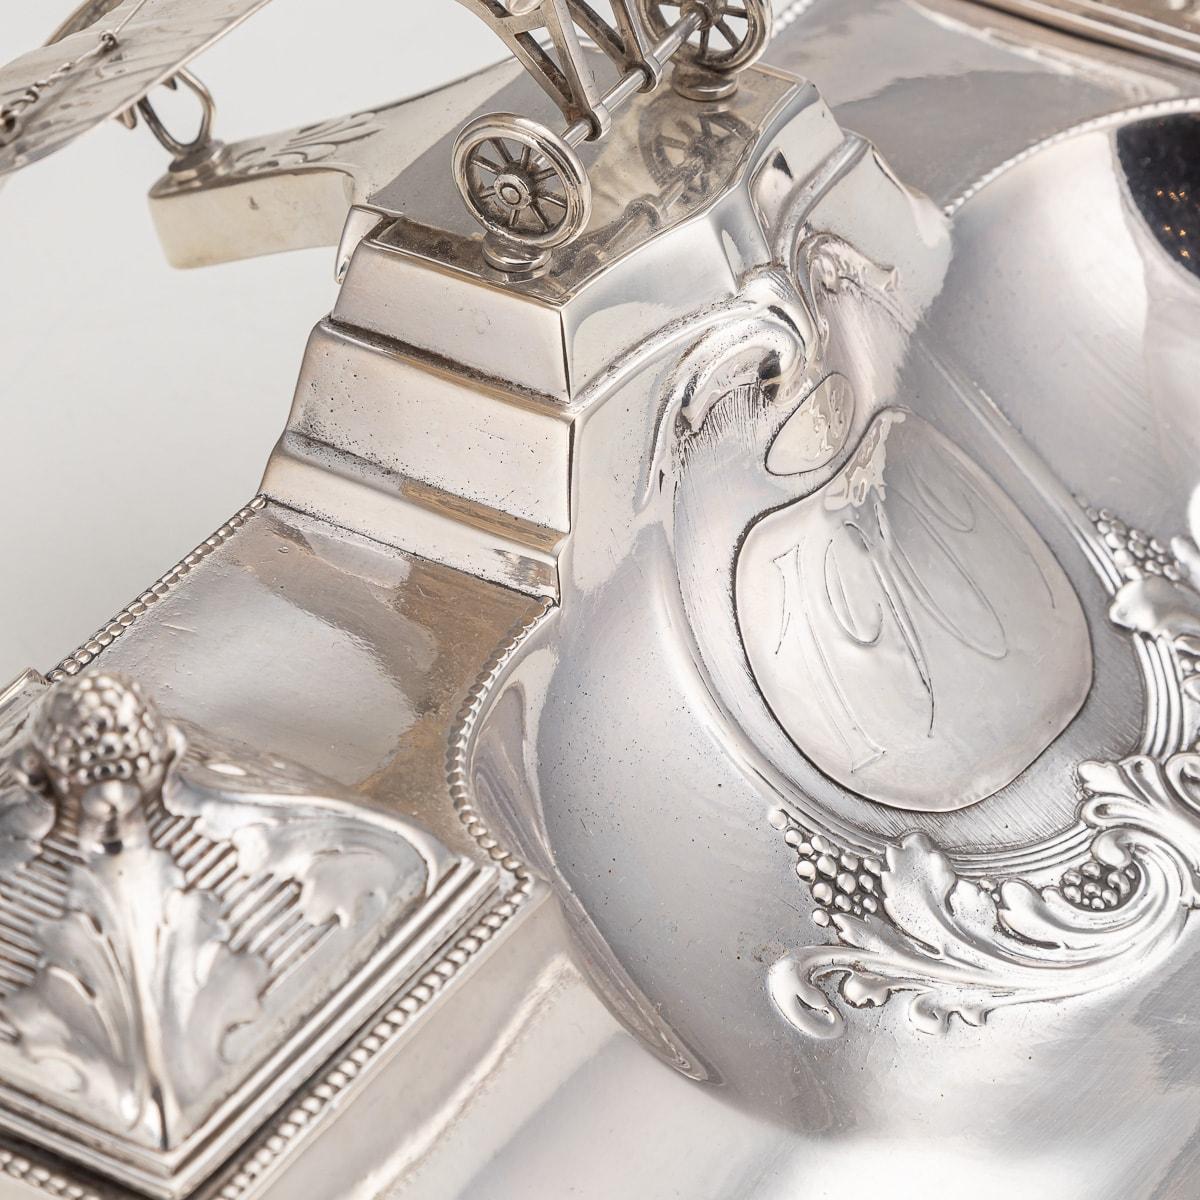 20th Century German Wmf Silver Double Inkwell With Aeroplane Theme, c.1920 5